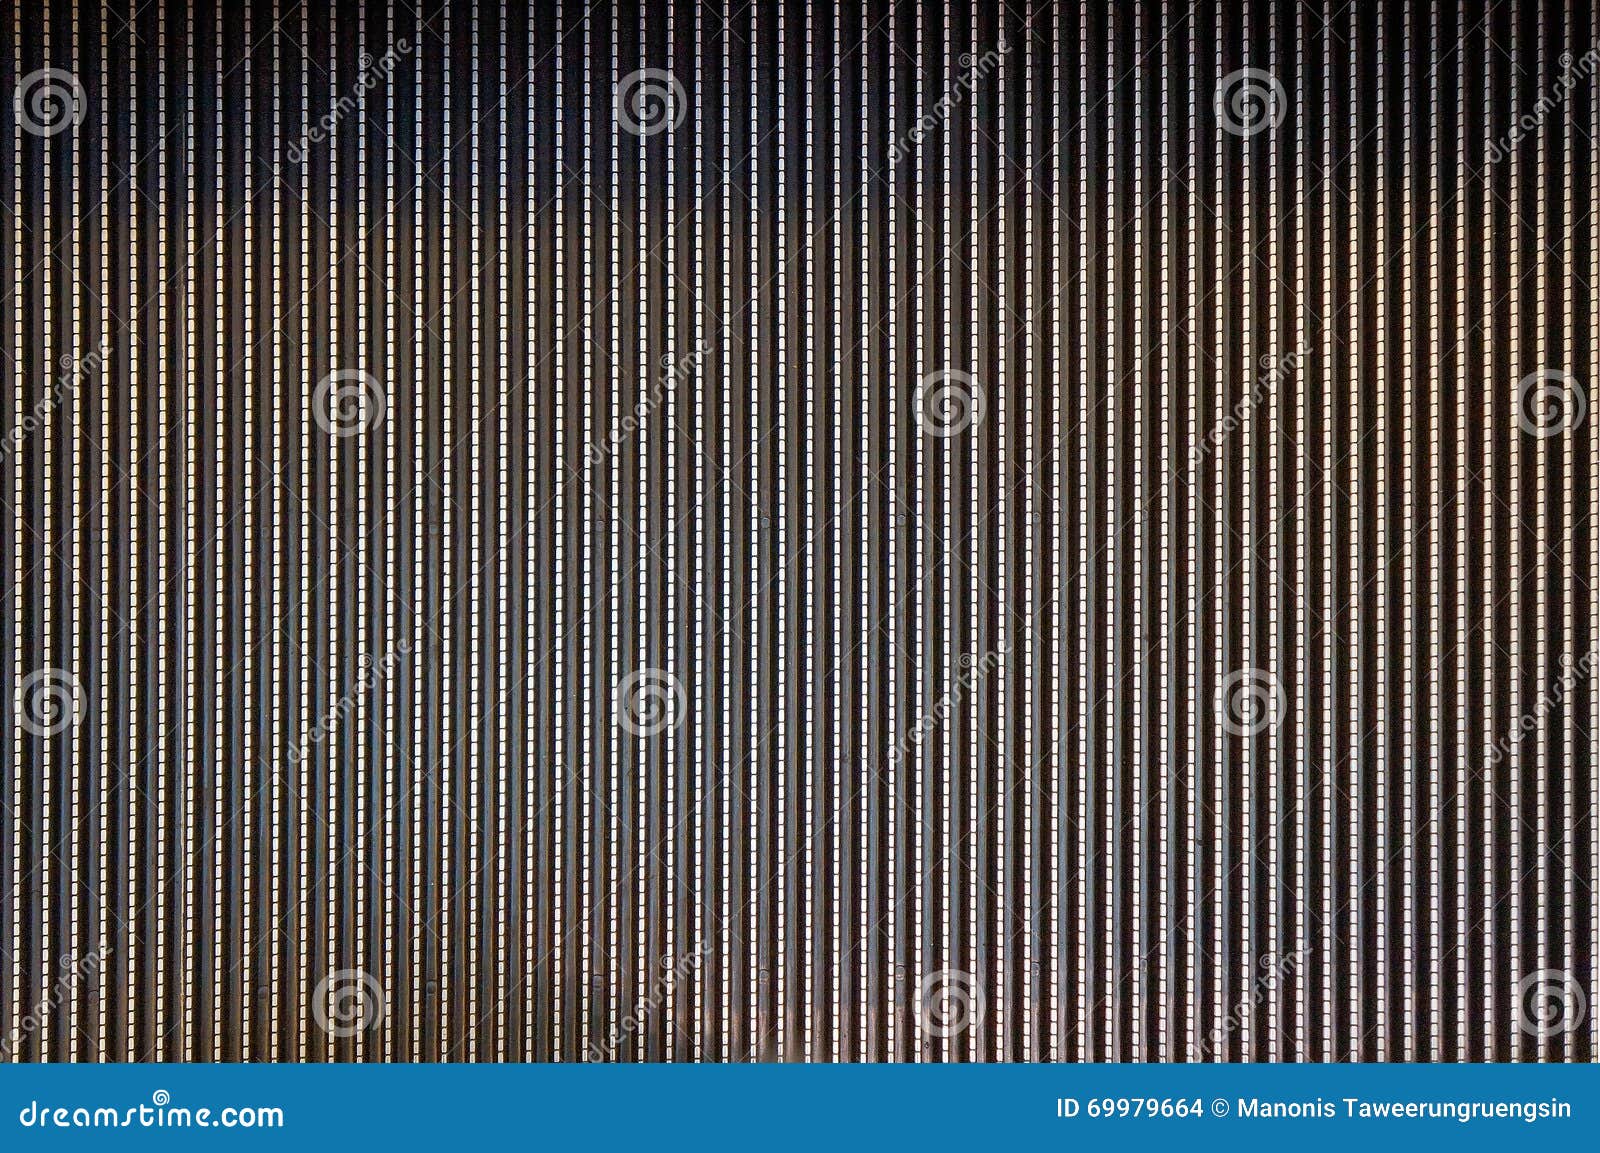 abstract background texture of striped pattern of metal escalator foot step